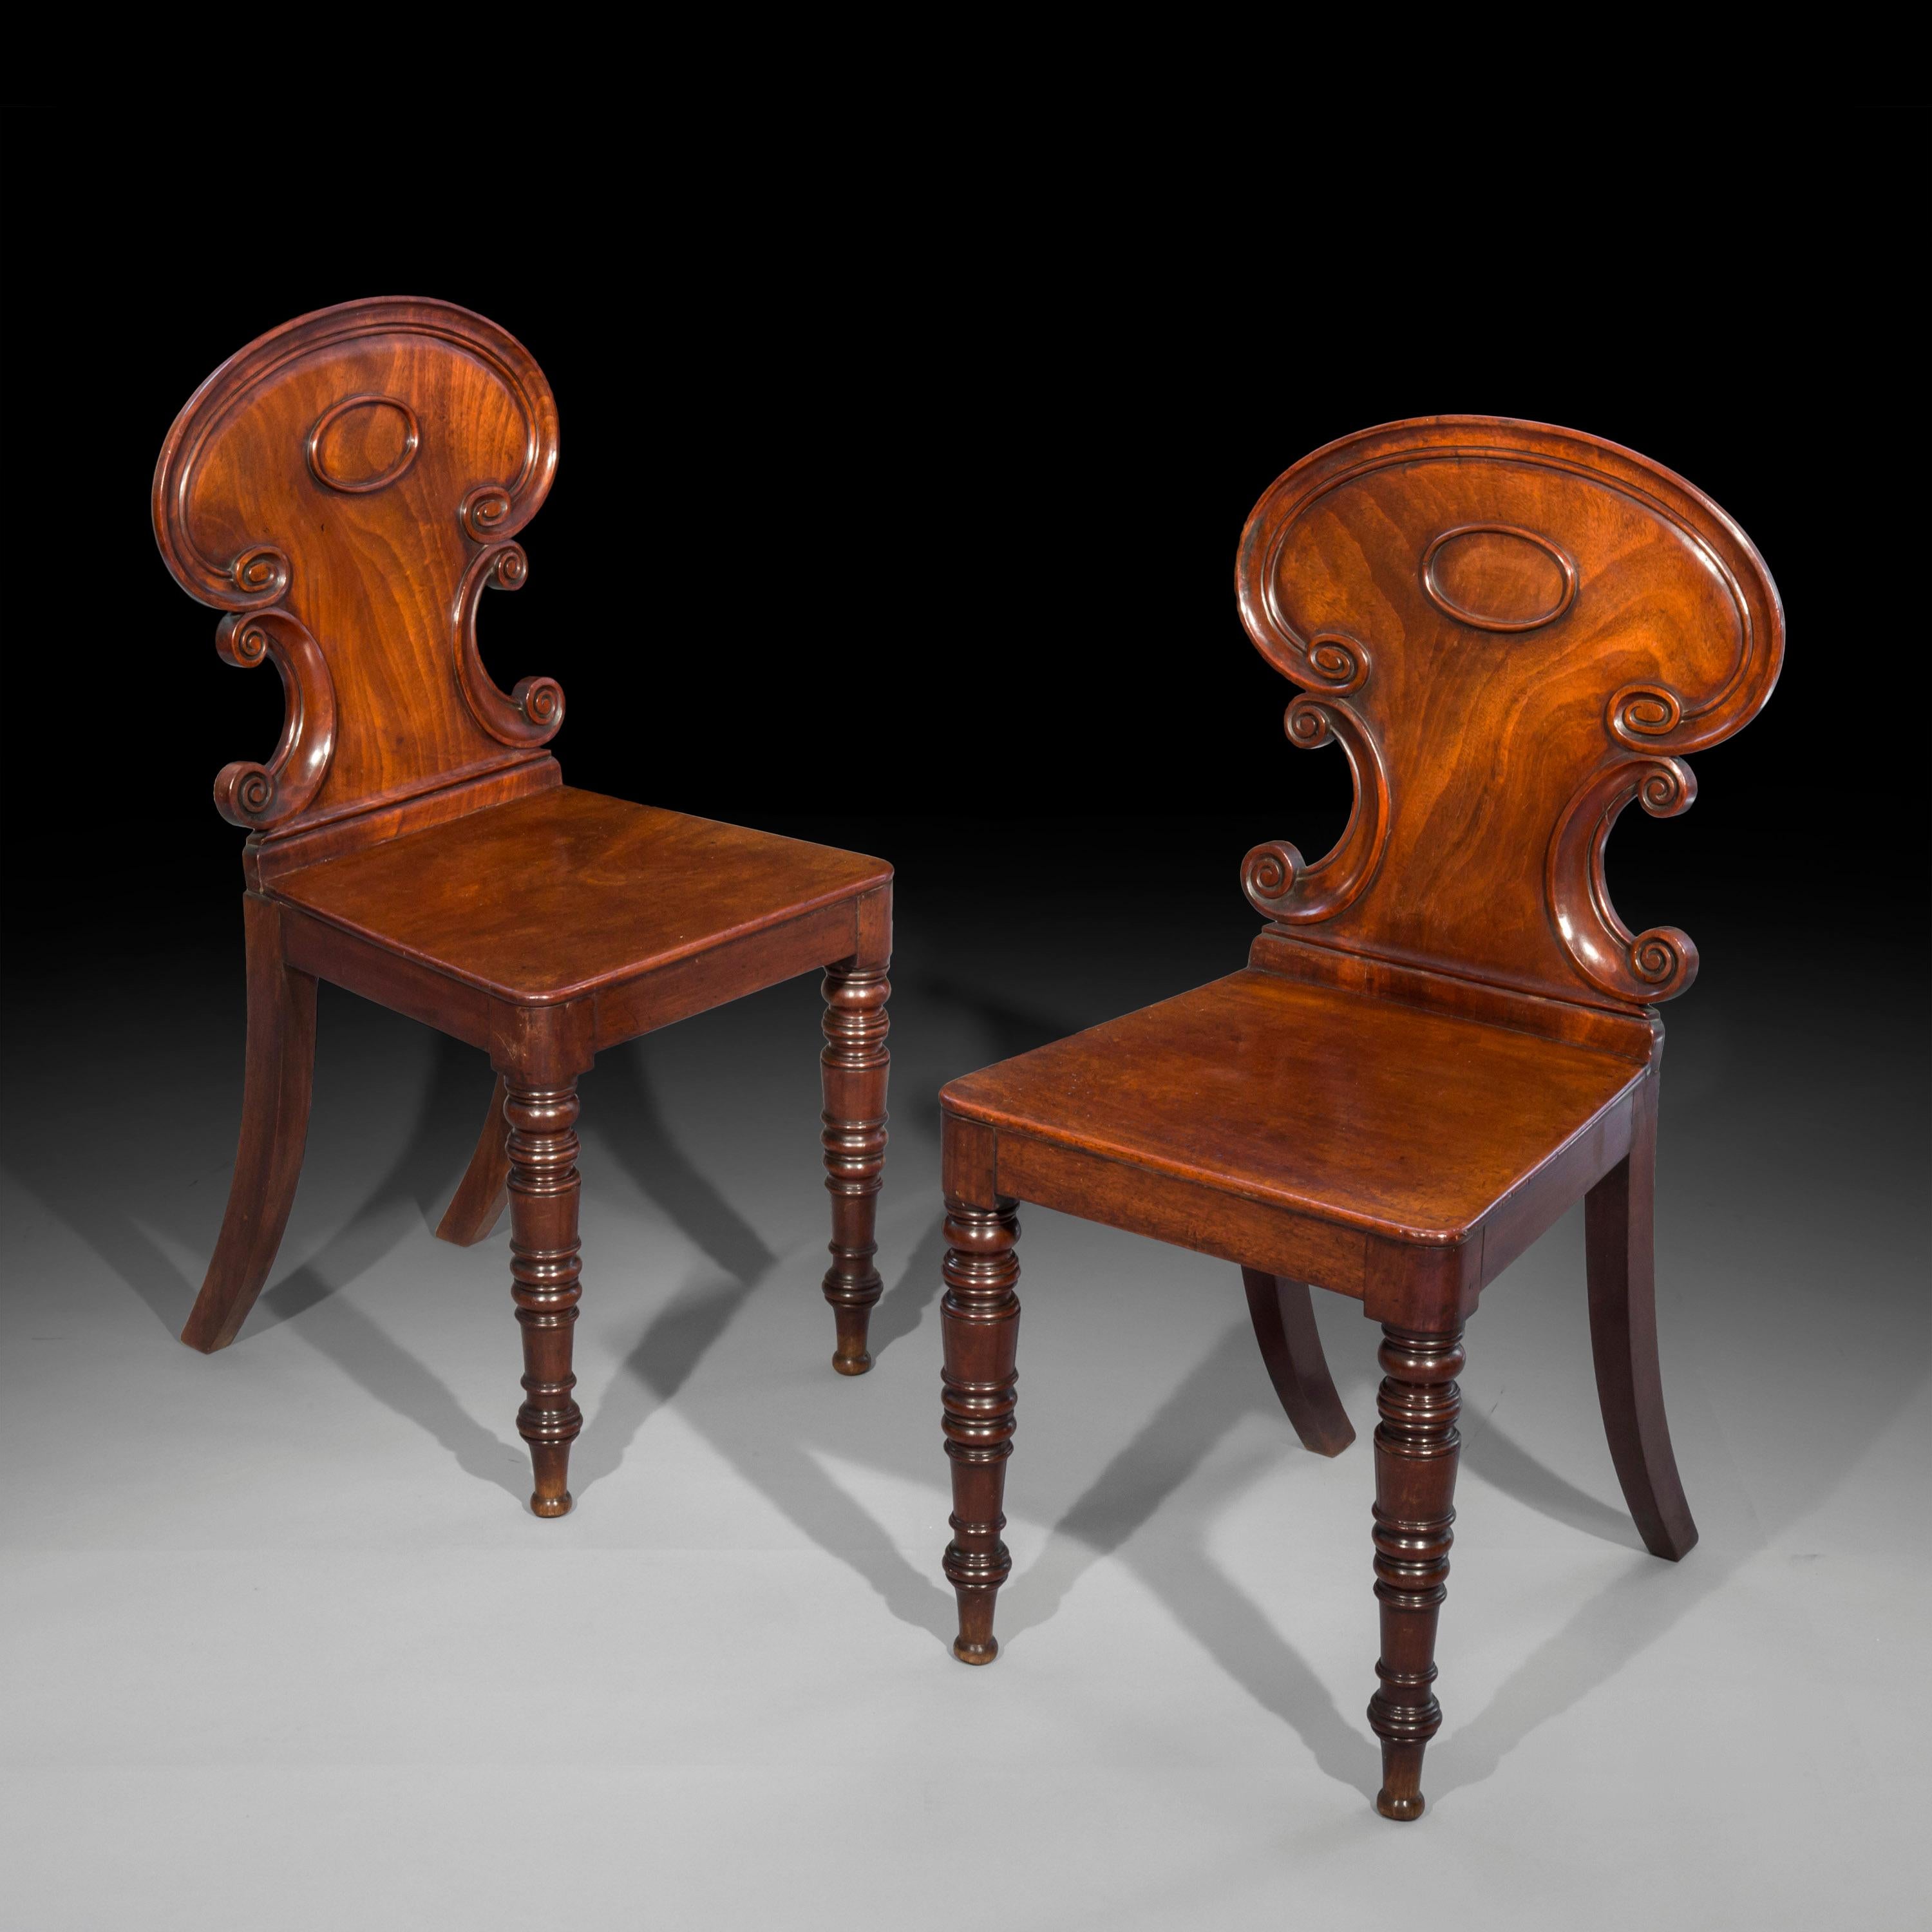 A very fine and elegant pair mahogany hall chairs of the Regency period, in the style of Gillows of Lancaster and London,
England, circa 1820.

Why we like them
Particularly rare design, with finely carved cartouche backs, essentially a more